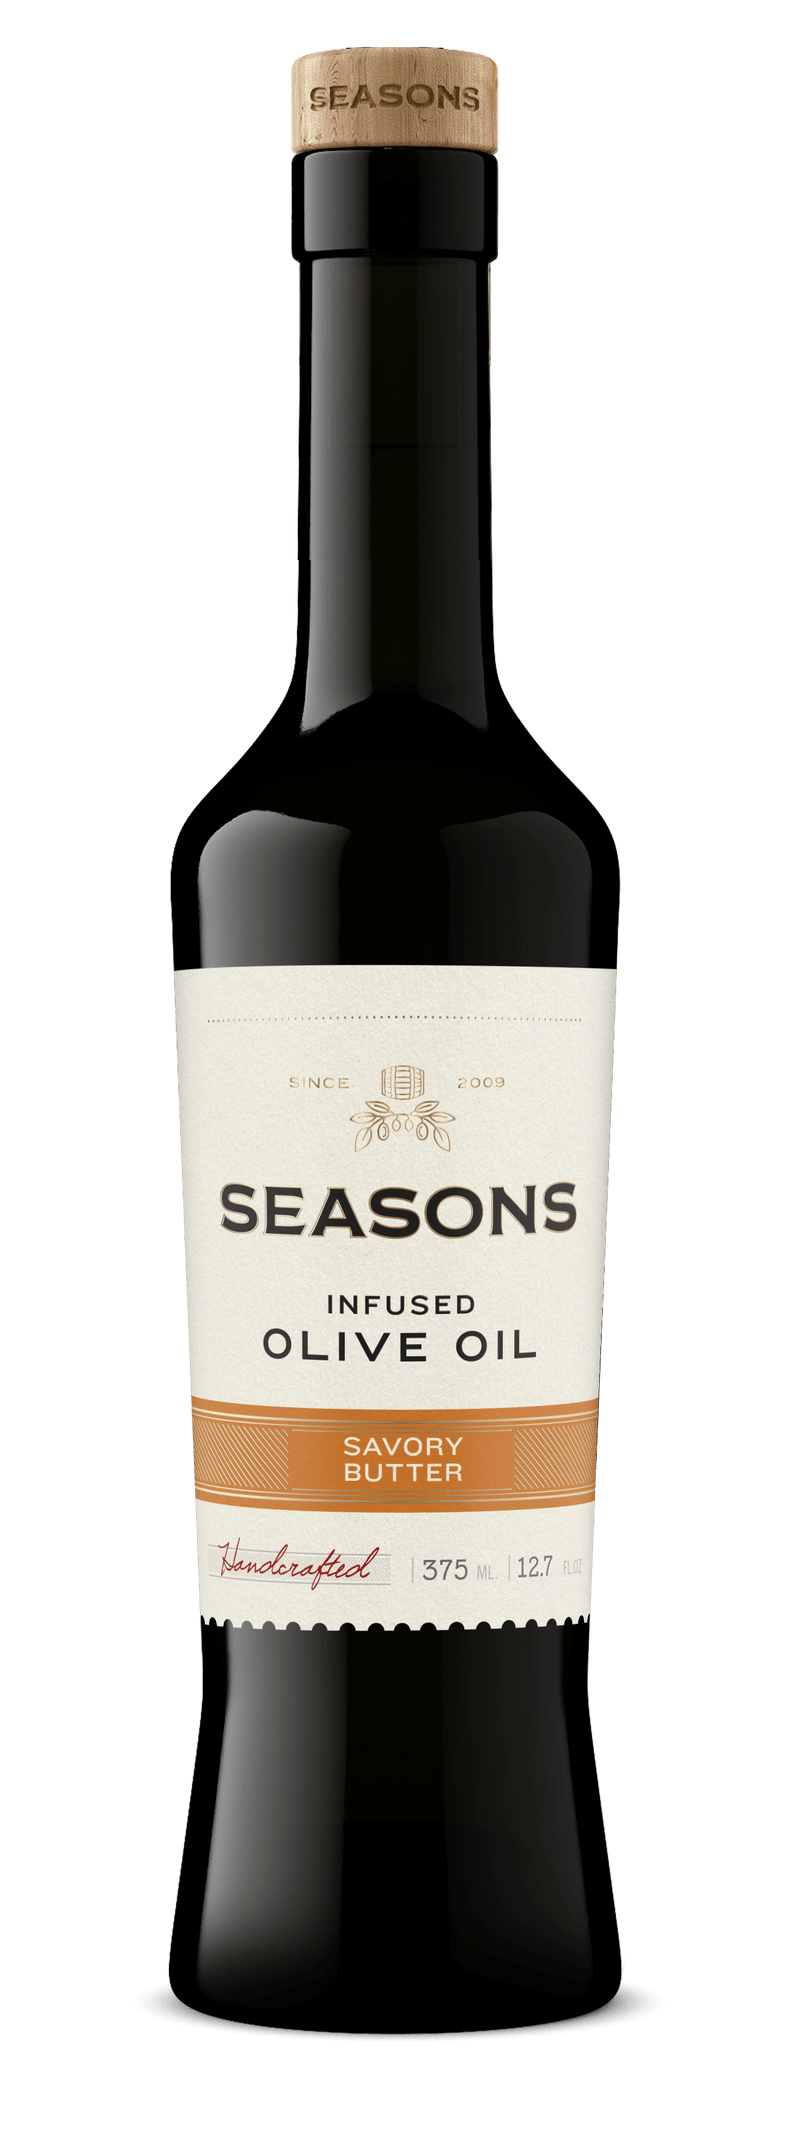 Seasons Infused Olive Oil 375mL Savory Butter